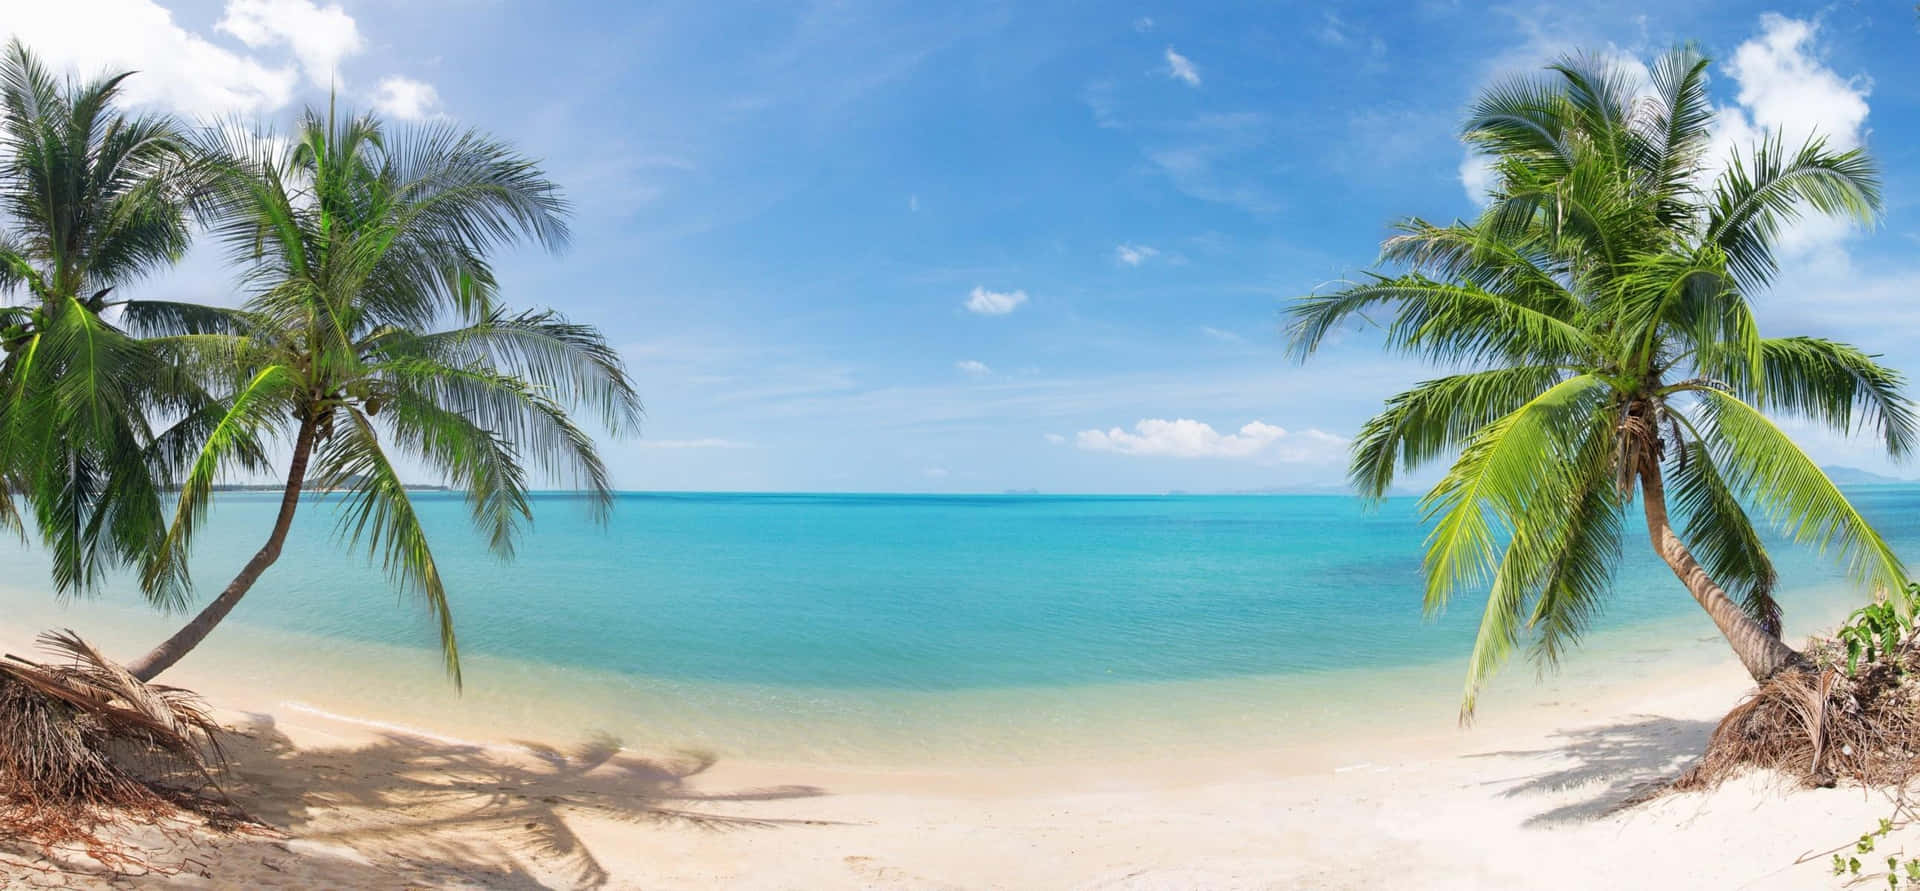 Take a Break and Relax on the Beautiful 720P Beach